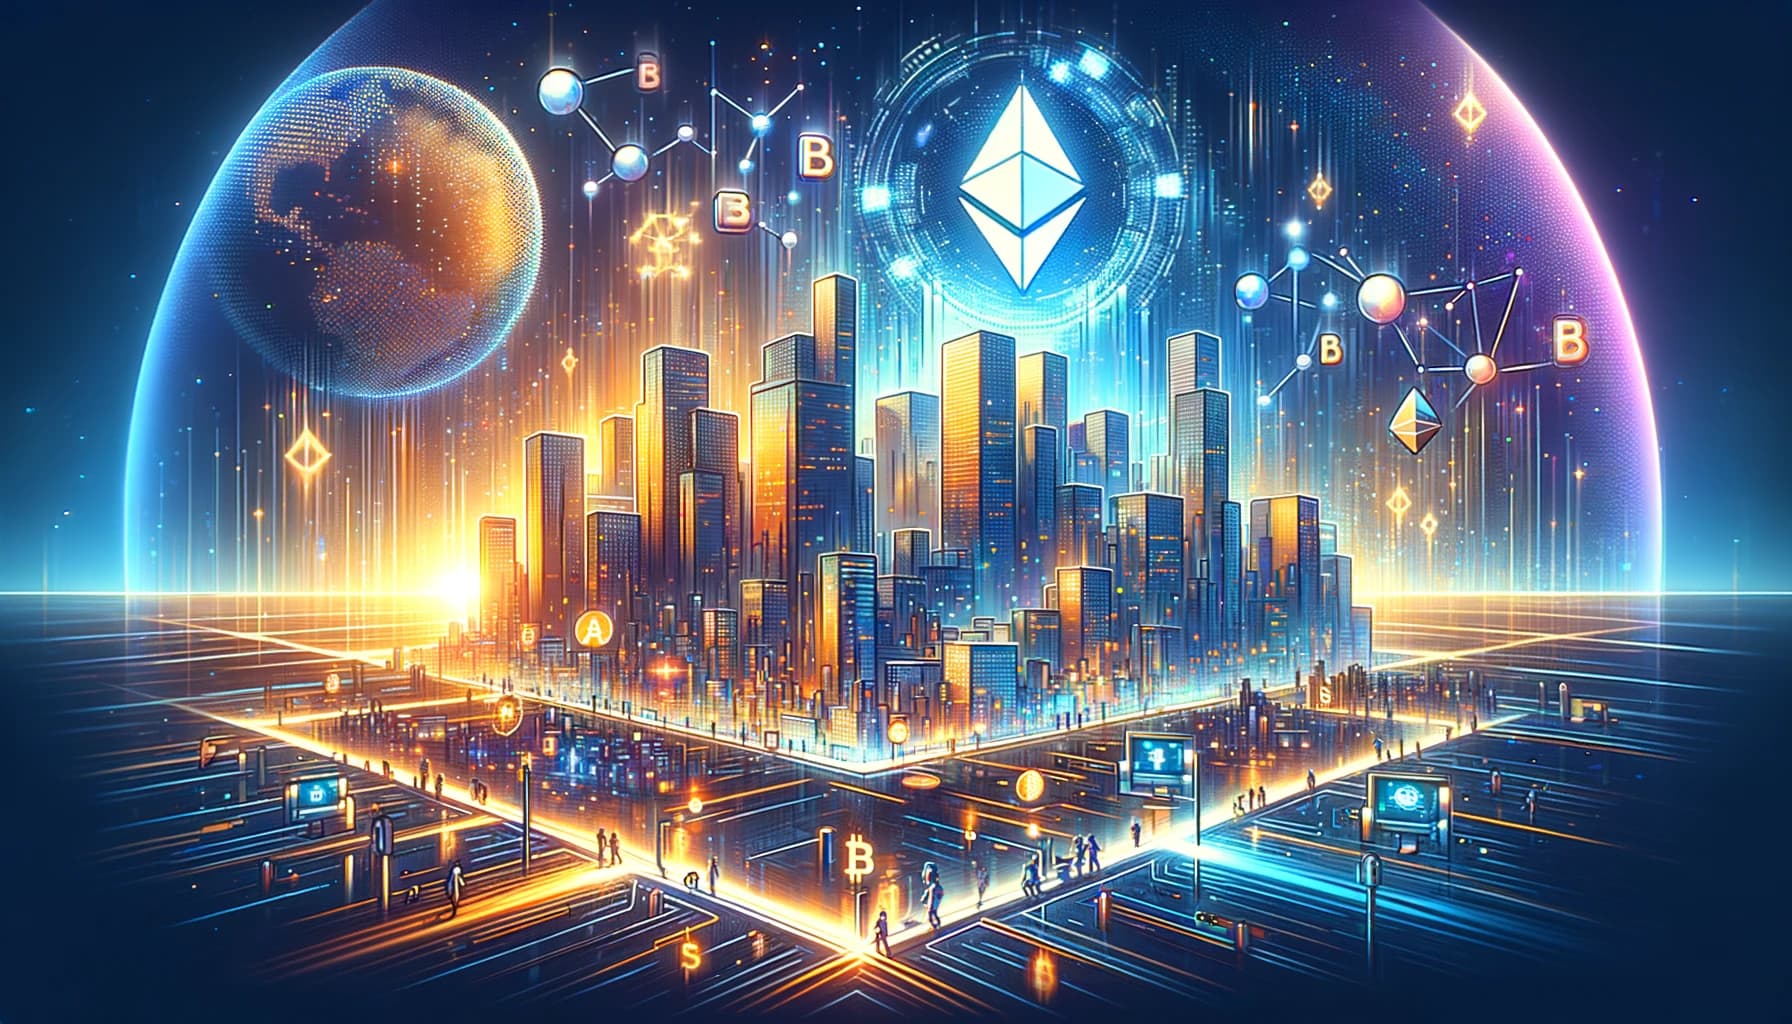 Bucket Technologies image showing a large downtown metropolitan area floating above a ground level populated with multiple persons all encased within a dome with various bitcoin logos floating about the night sky.